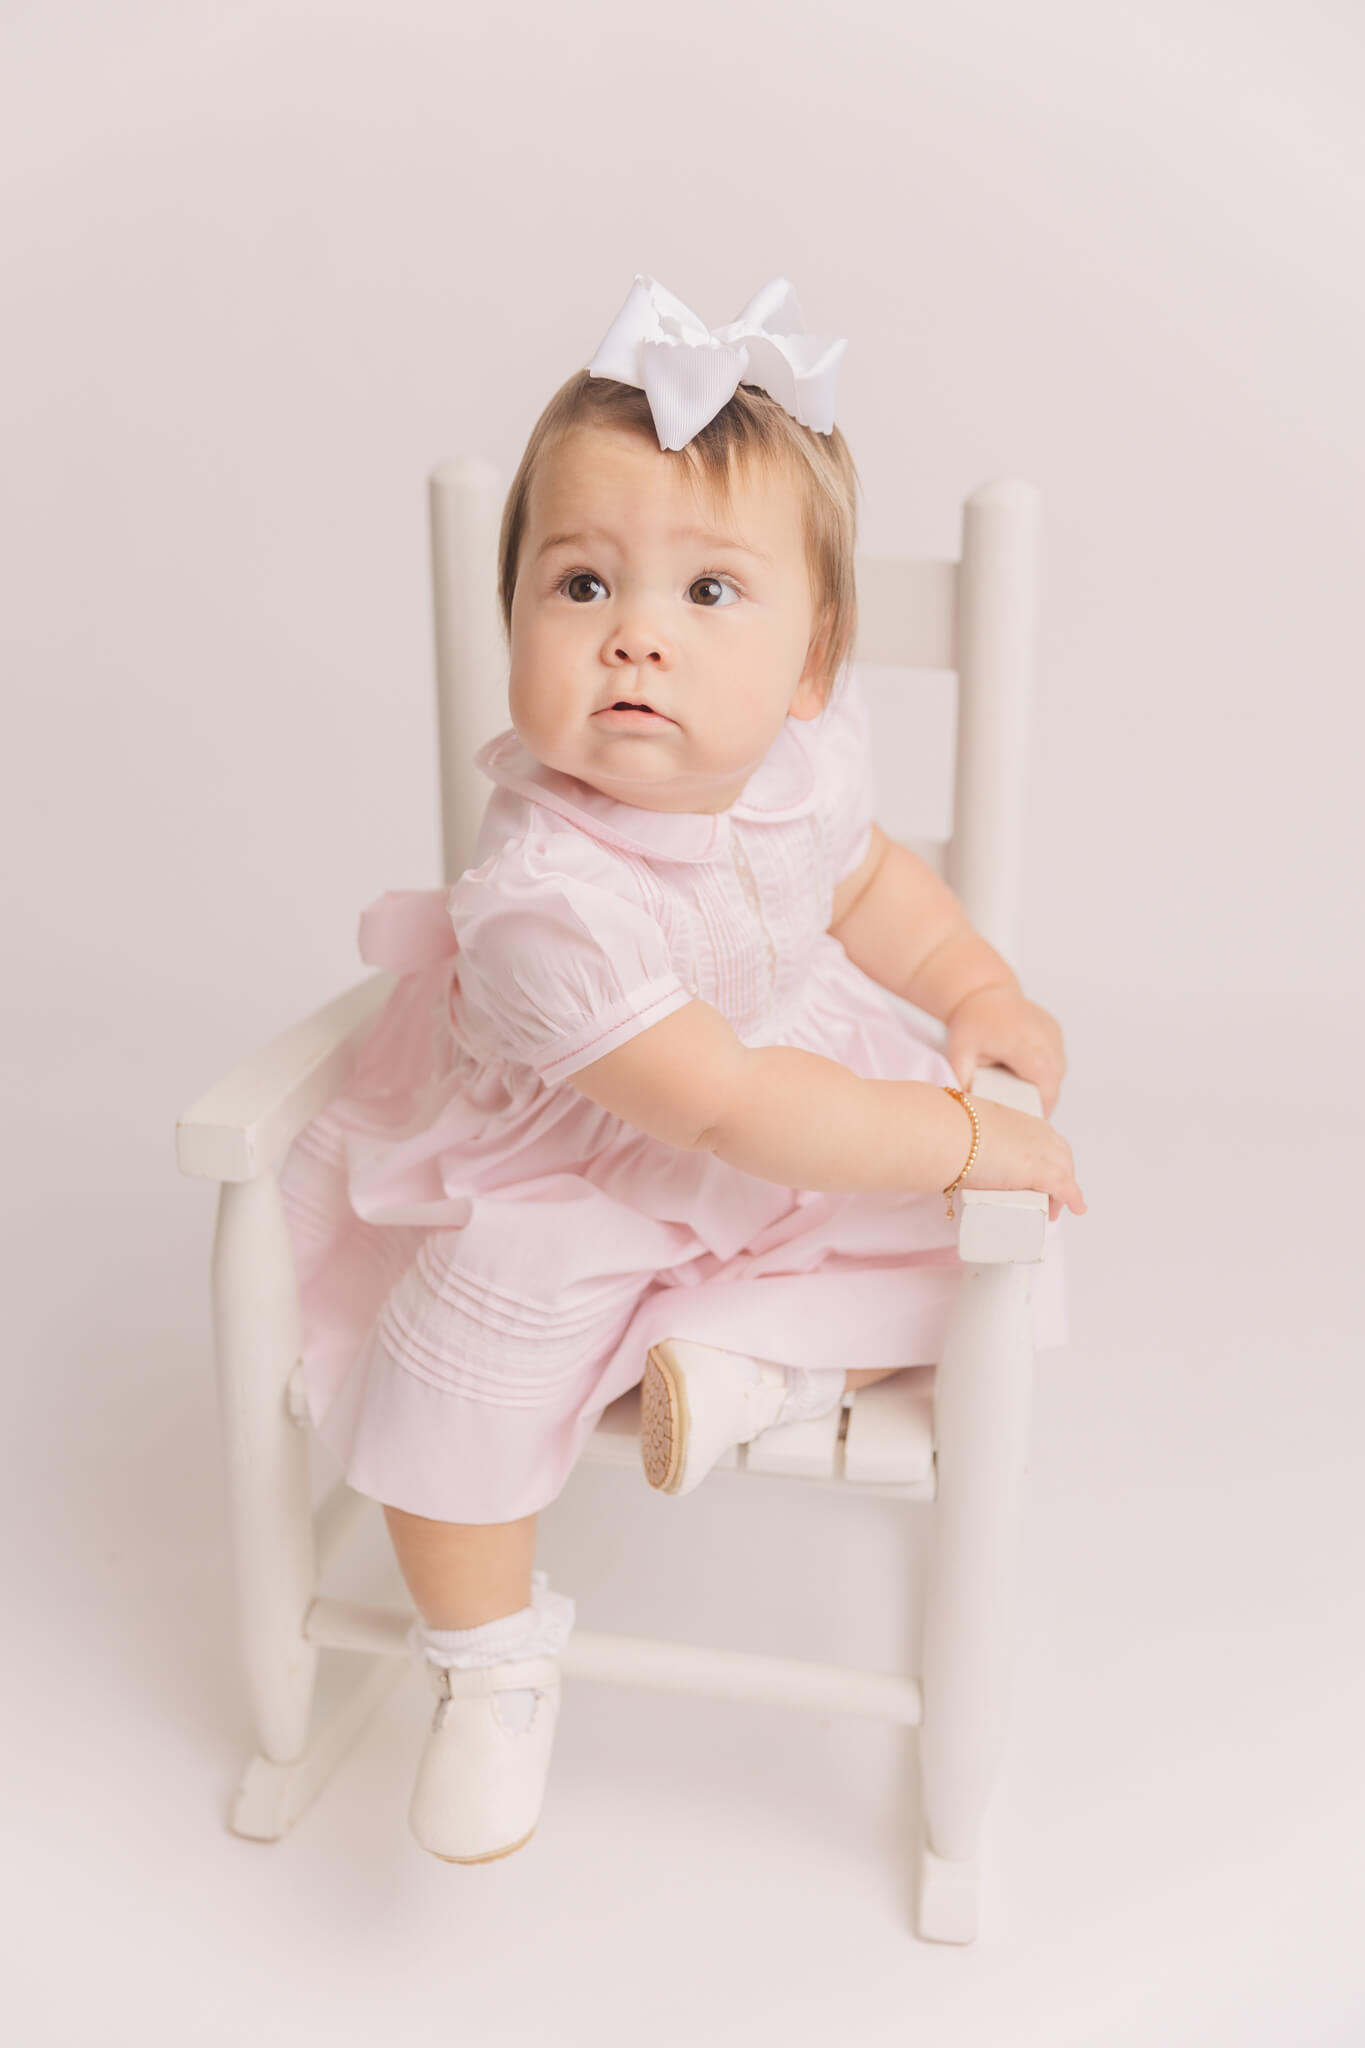 Little Girl in pink dress and white bow sitting in a white rocking chair Little Bear Smocks